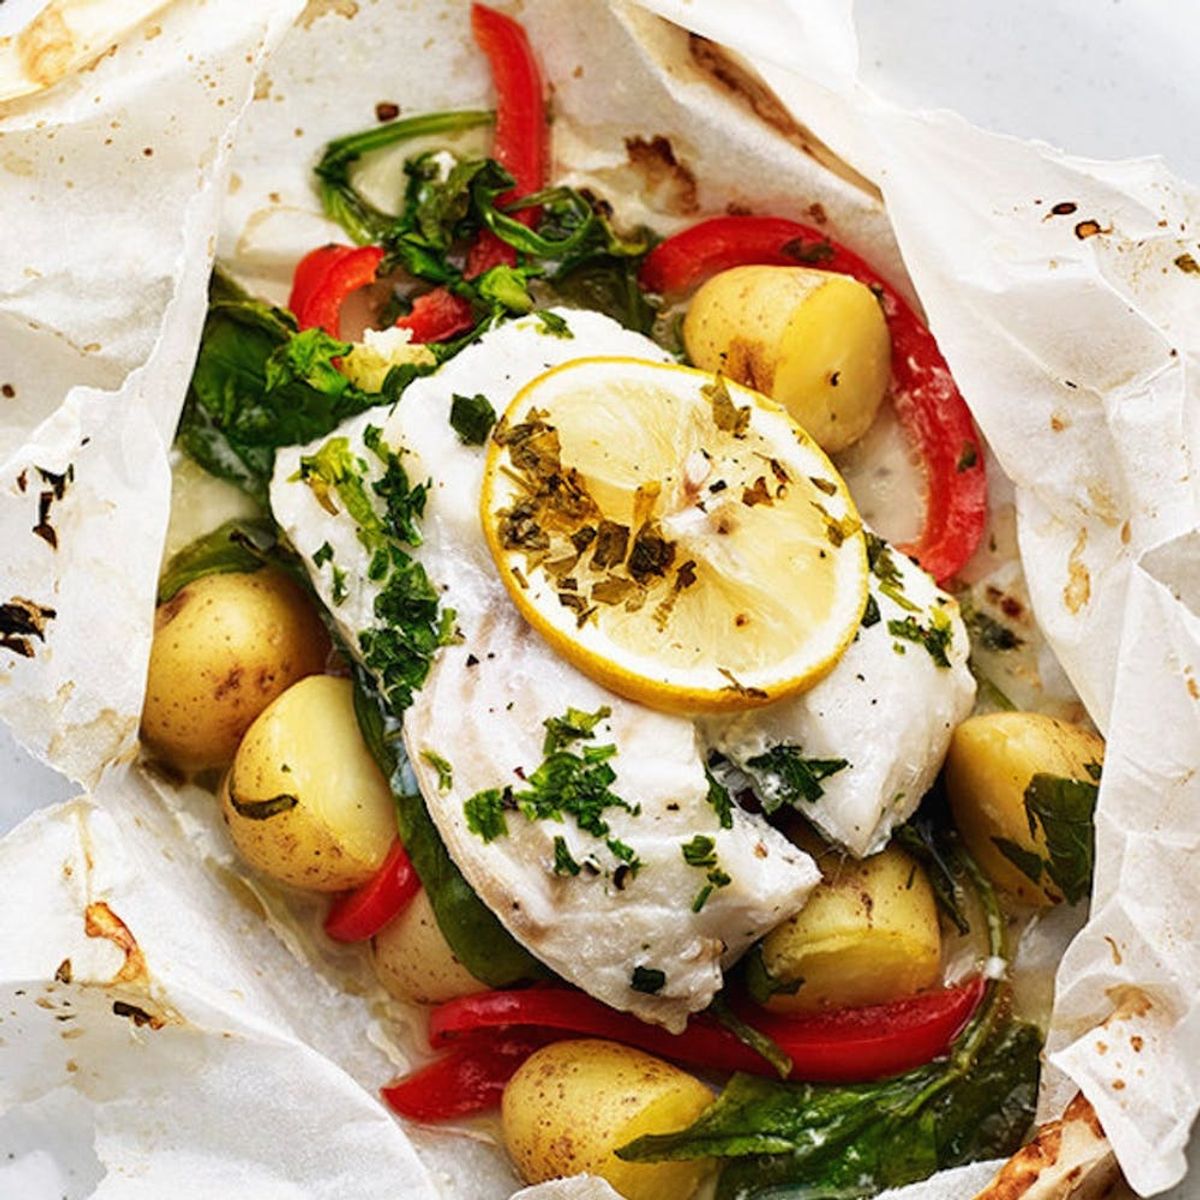 18 Parchment Meals That Make Cooking Fish for Dinner a Breeze